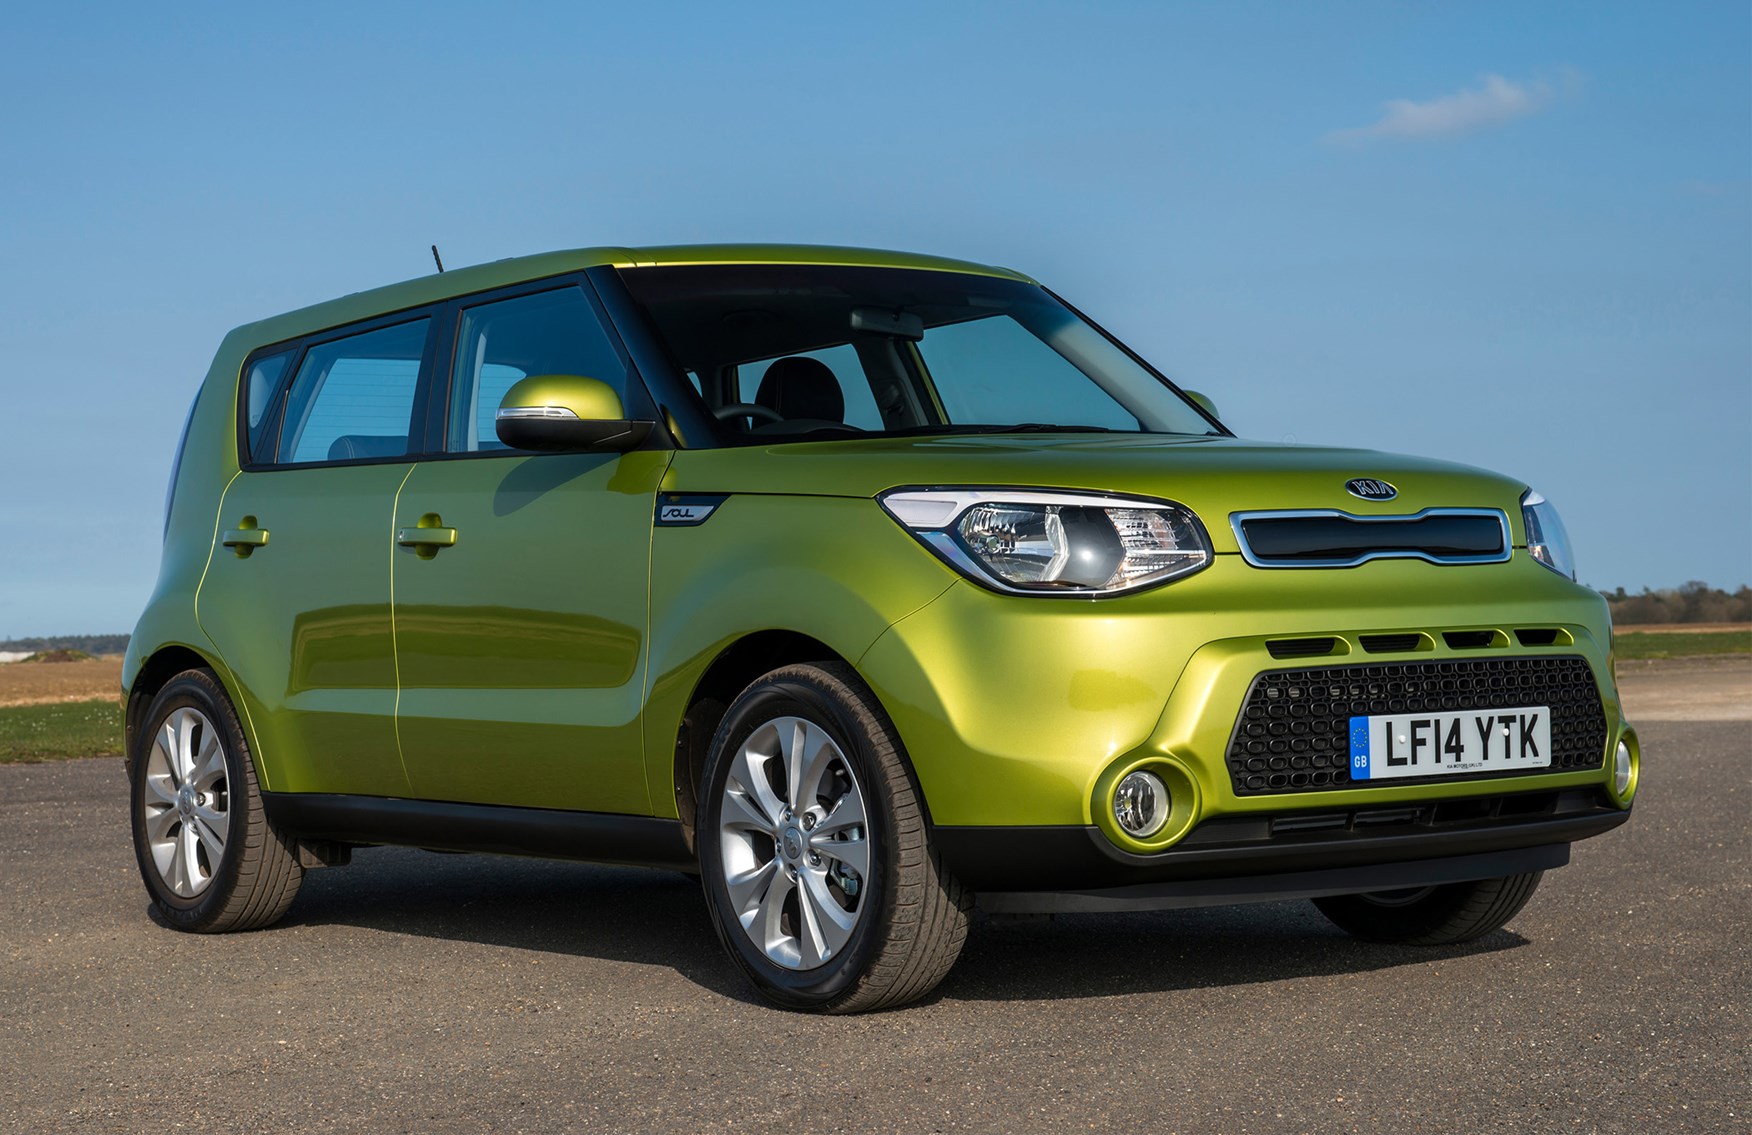 Used Kia Soul Hatchback (2014 - 2019) Review | Parkers